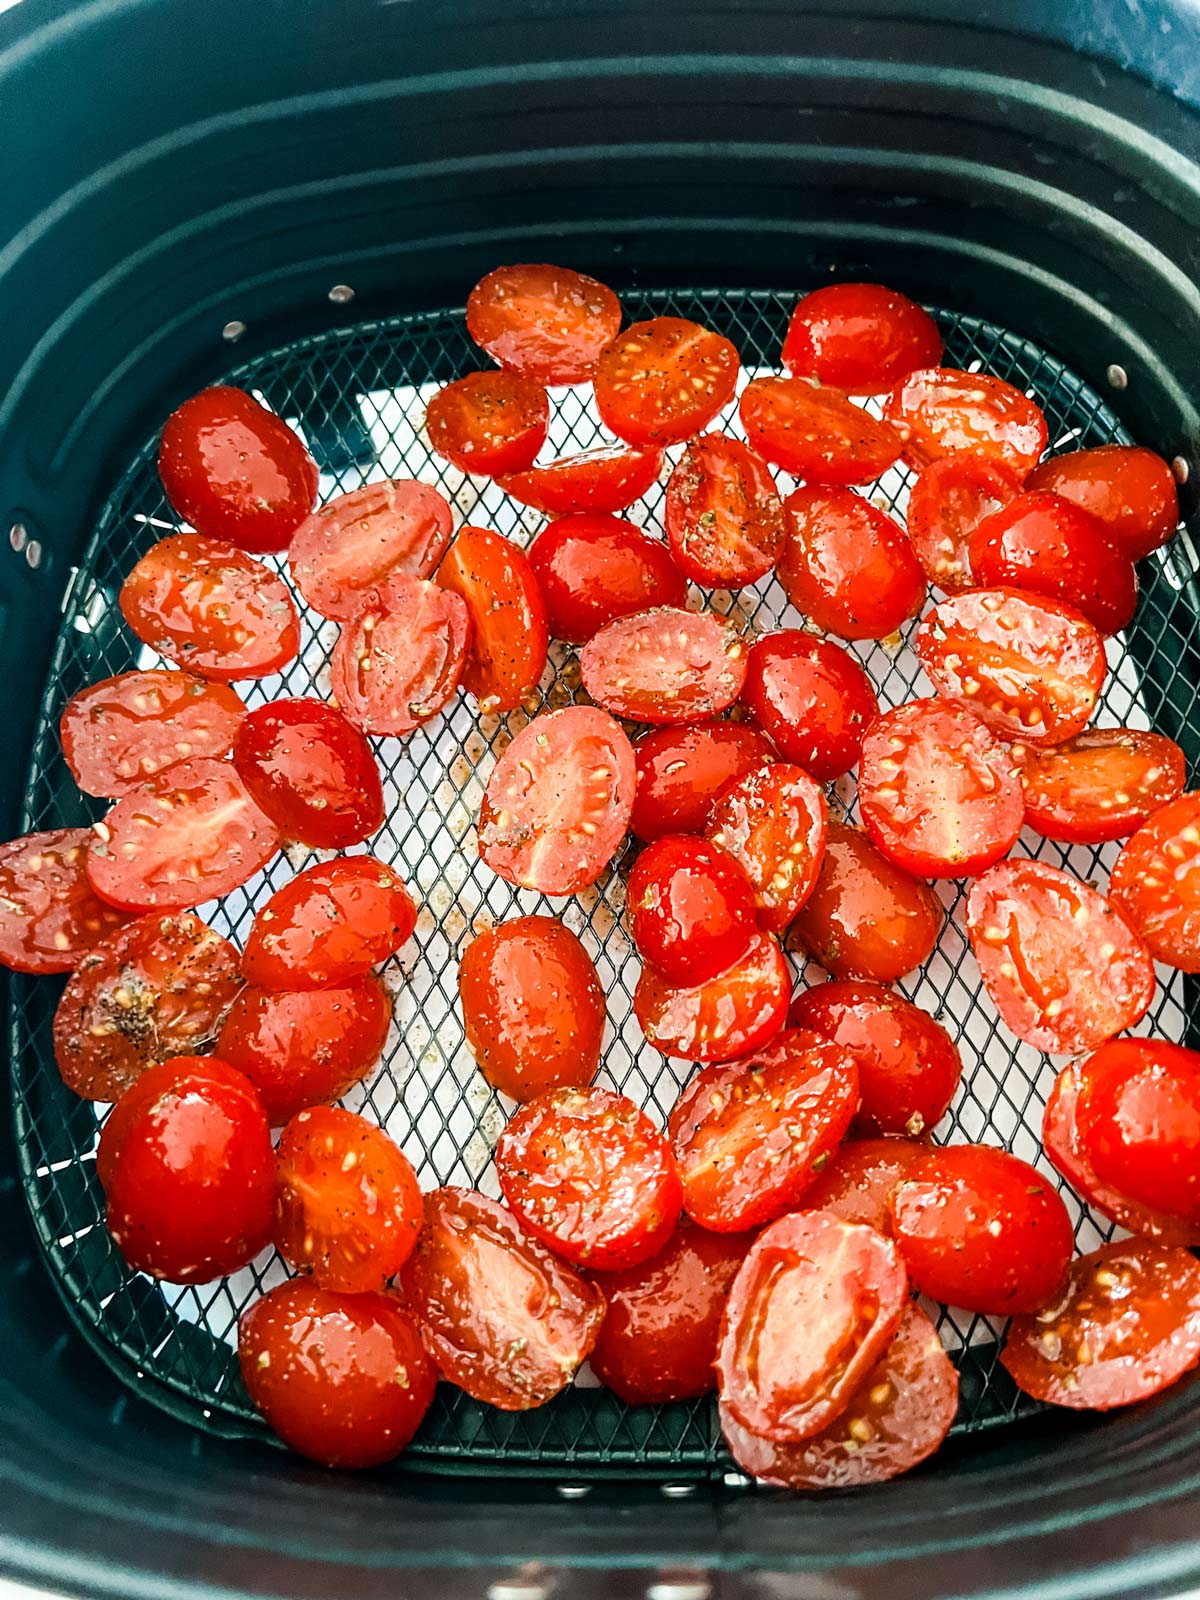 Halved grape tomatoes in an air fryer basket ready to cook.